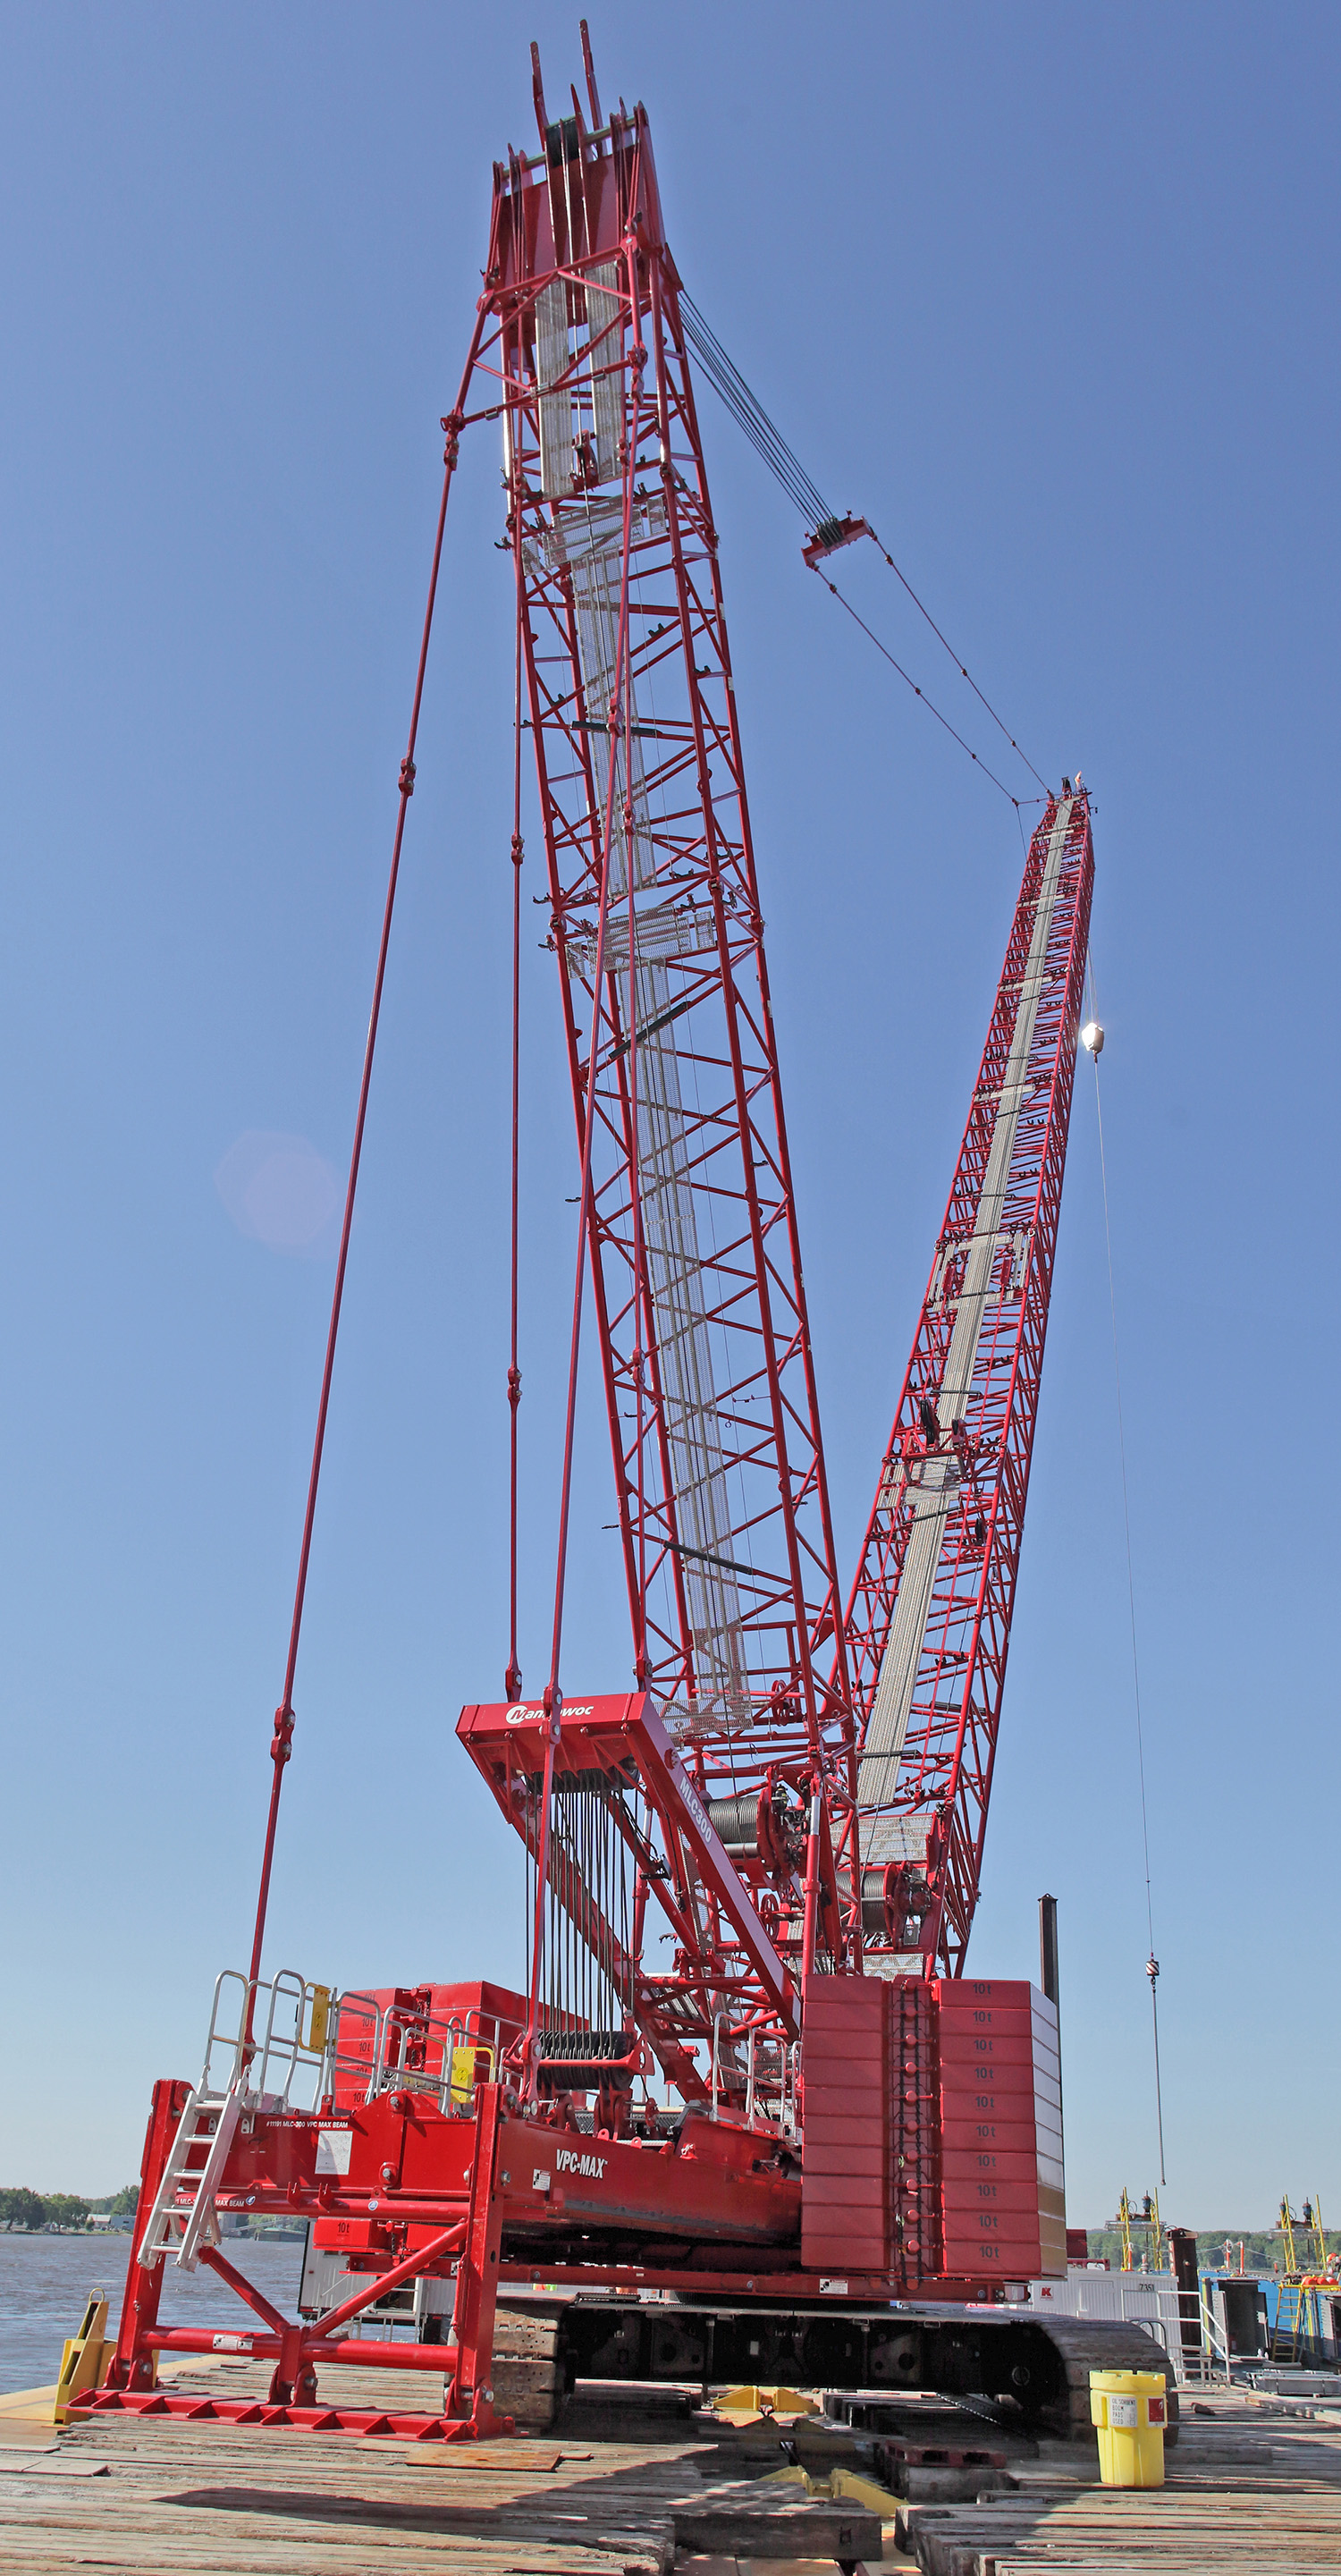 When the Manitowoc MLC300 crawler crane debuted with Variable Position Counterweight (VPC) and VPC-MAX heavy lift attachment, one of its unique selling points was the crane’s barge-lifting capabilities. The reduced footprint and floating counterweight meant that it would be much more efficient for lifters to barge-mount a crawler crane. Contracting teams could erect the crane onto smaller water-based barges because the machine automatically adjusts its center of gravity for each lift.